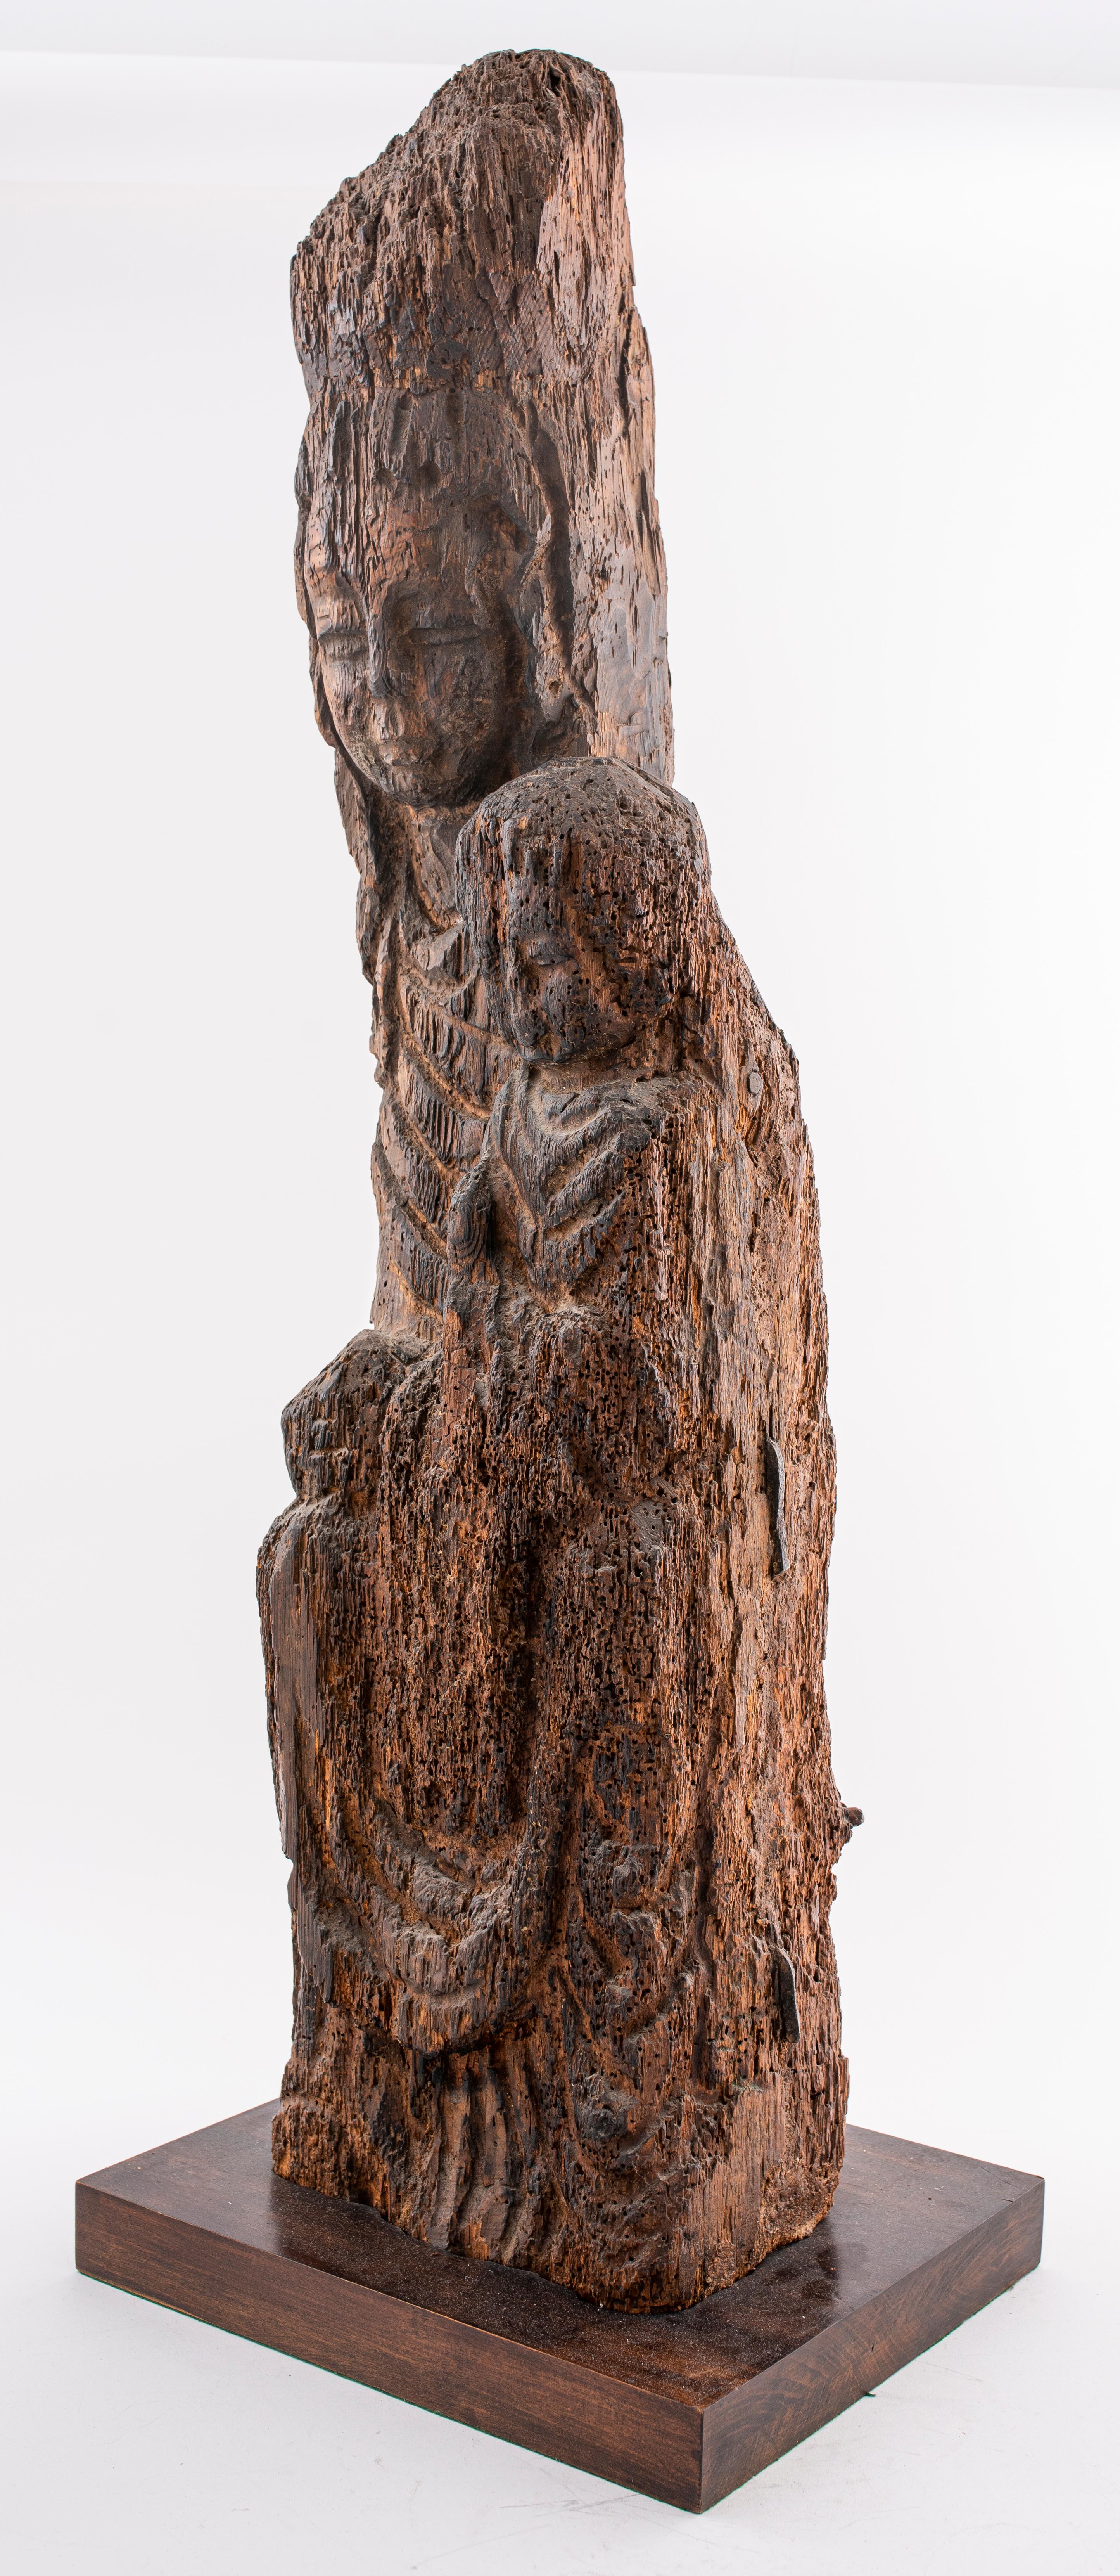 Large wooden figure of Kuan Yin / Guanyin, Buddhist Madonna, the goddess shown seated with a child on her left knee, her hair in a high topknot under a cowled headdress and her long robes falling in folds to the base, roughly hew from one block of